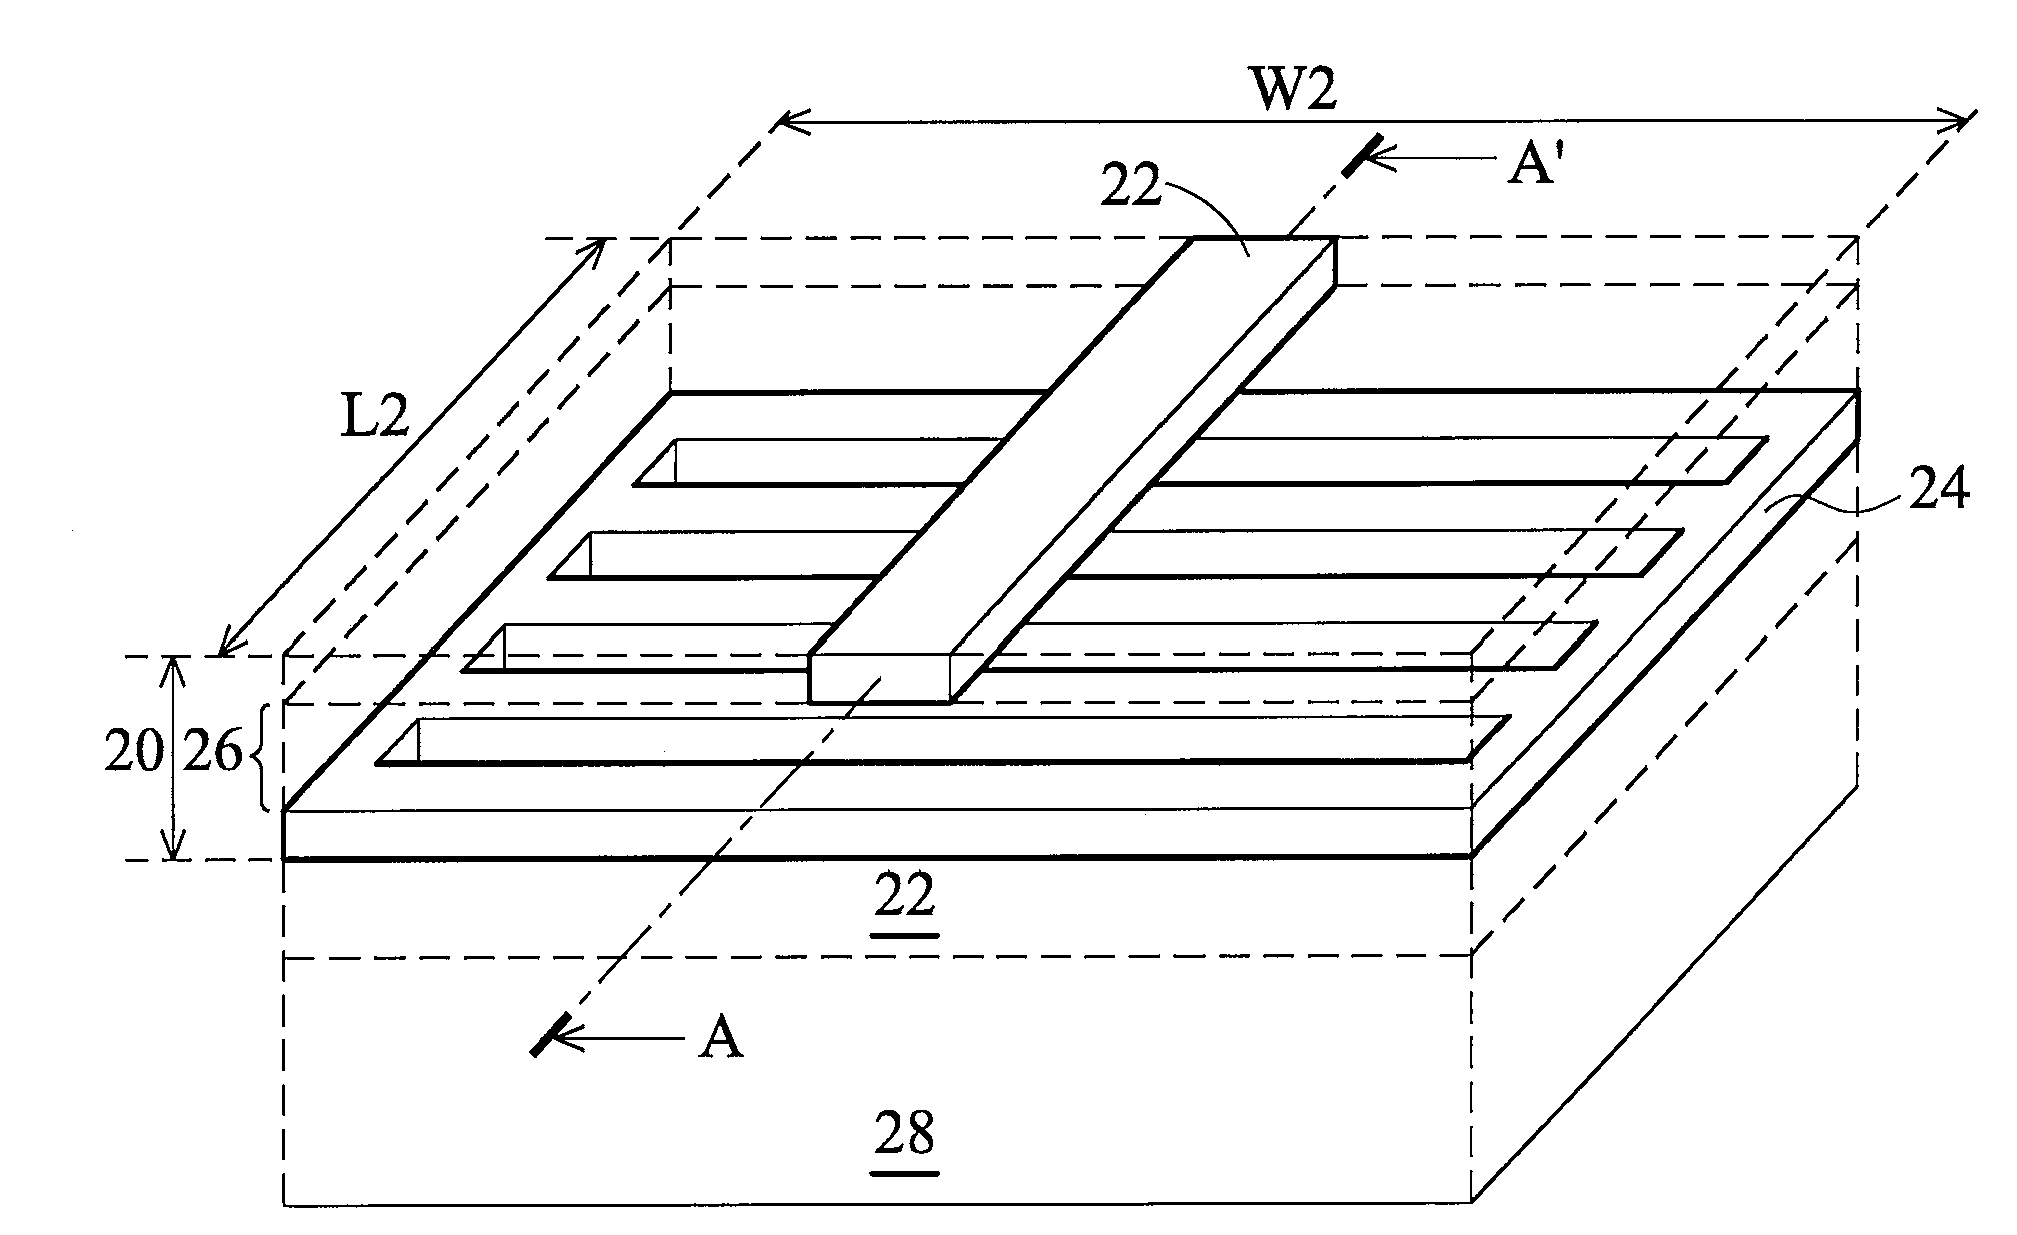 Microstrip Lines with Tunable Characteristic Impedance and Wavelength